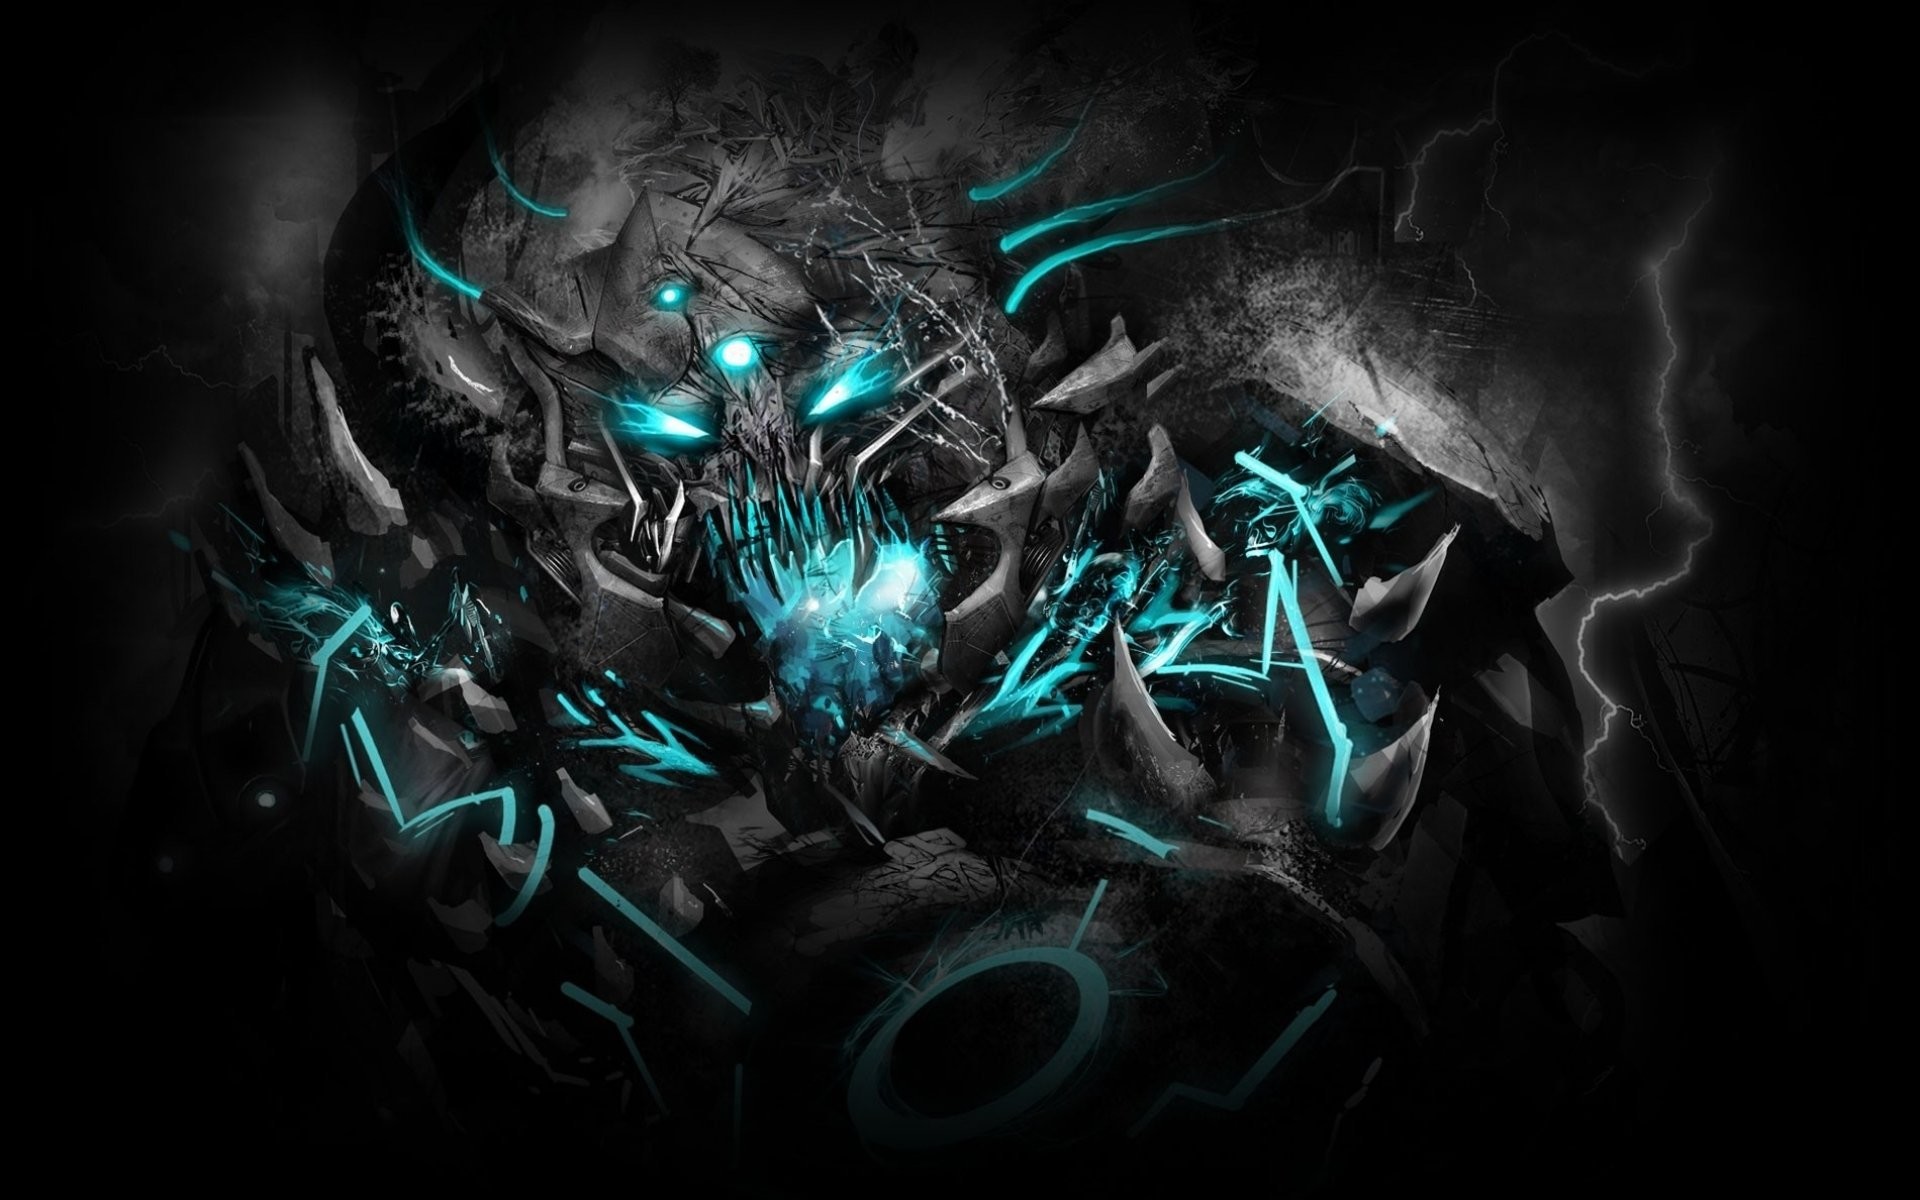 1920x1200 dubstep dubstep music music monster excision